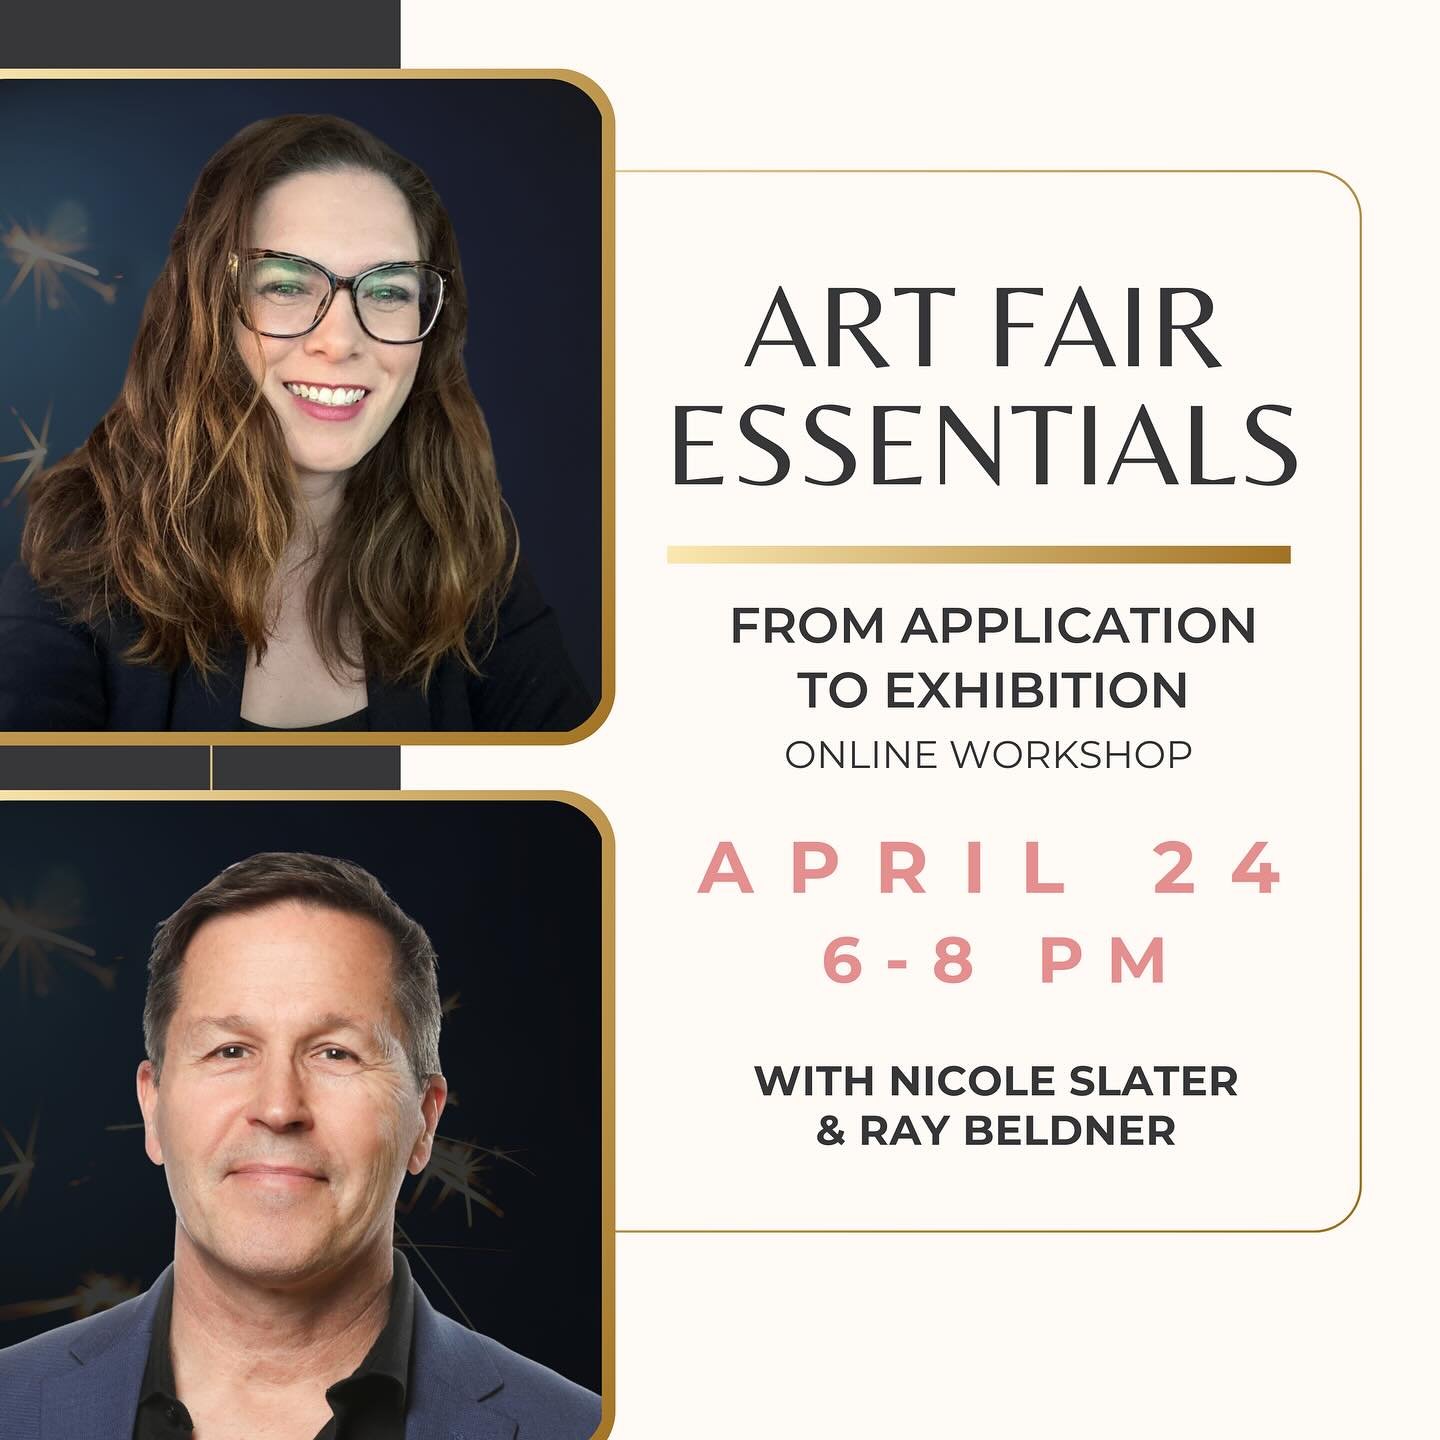 REMINDER&mdash;JUST OVER A WEEK TO GO!

Join @nicoleslaterconsulting and me for an informative workshop on April 24 from 6-8pm PST. To RSVP click the link in my bio.

At $39, you can&rsquo;t afford NOT to go!

#artistworkshop #artfairessentials #rayb